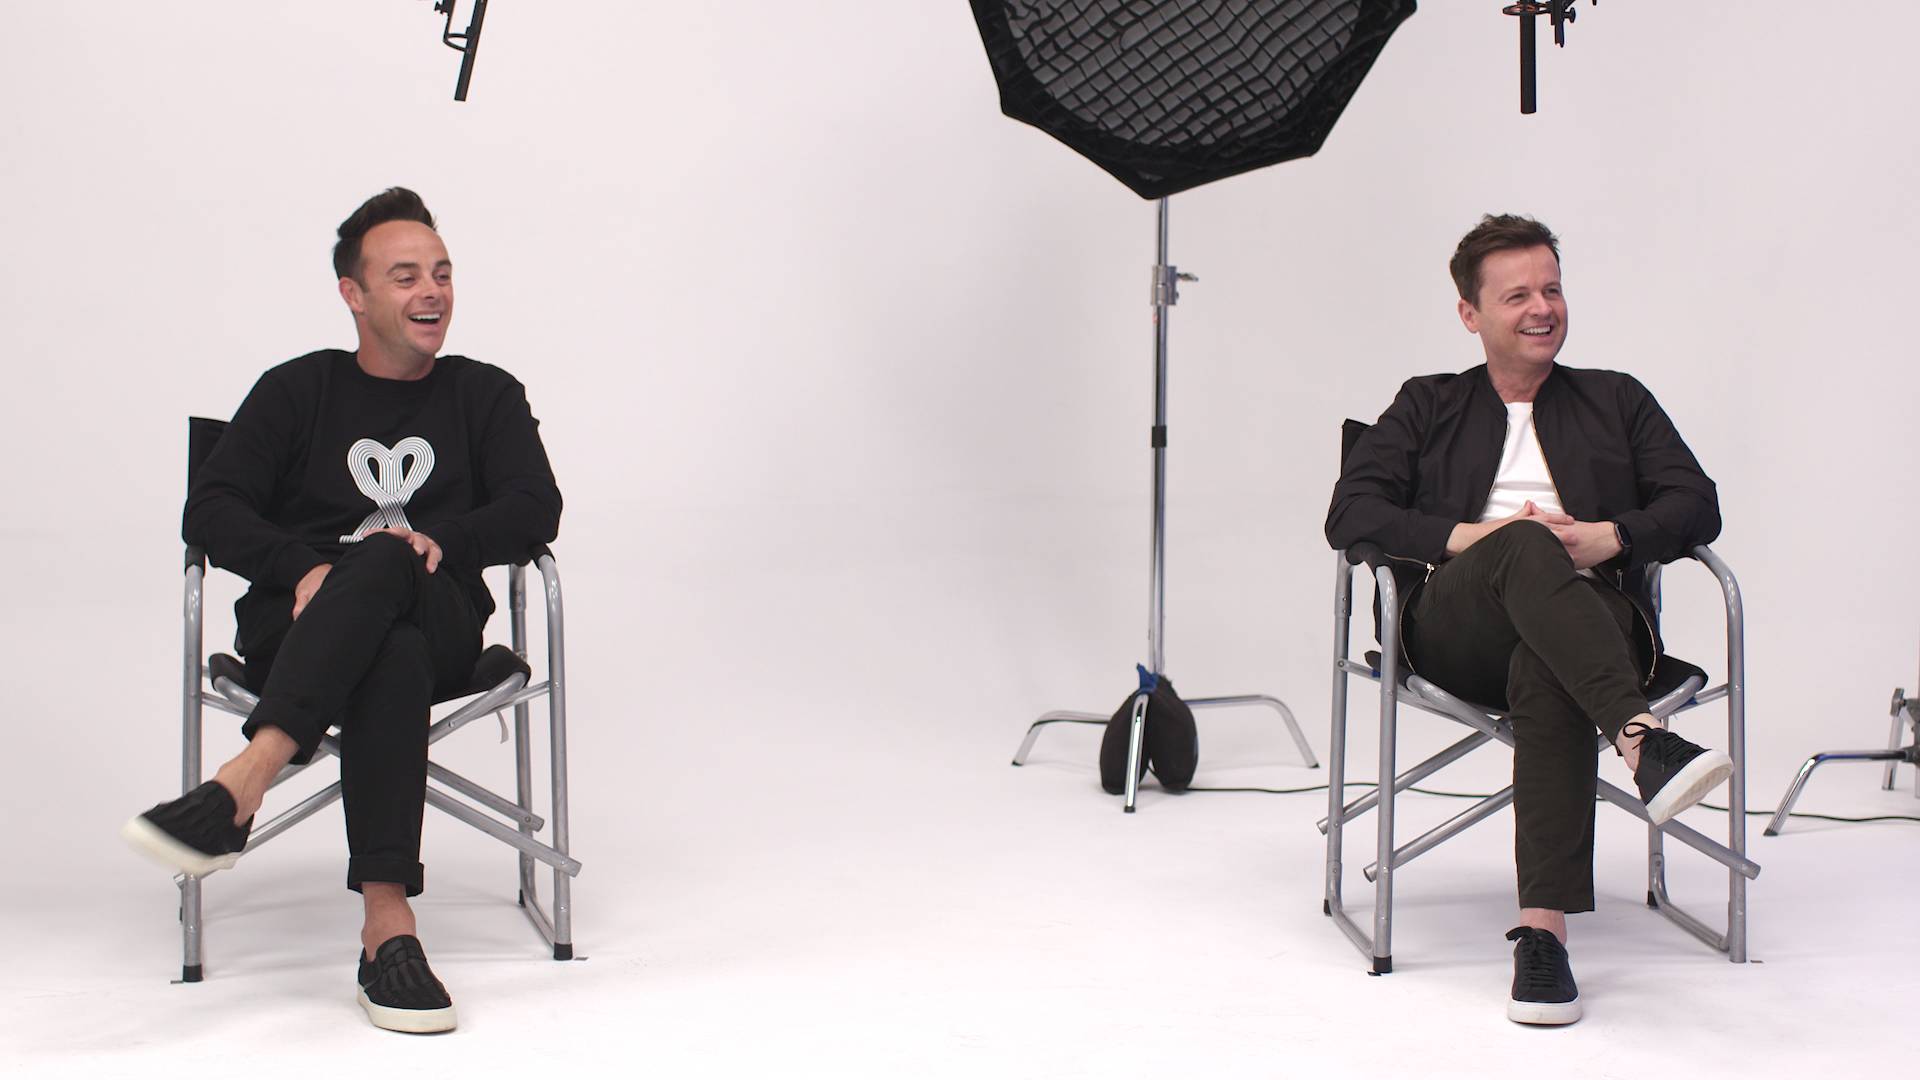 Ant & Dec Take Us Through Every Twist and Turn That Their Career Took in ‘Once Upon a Tyne’